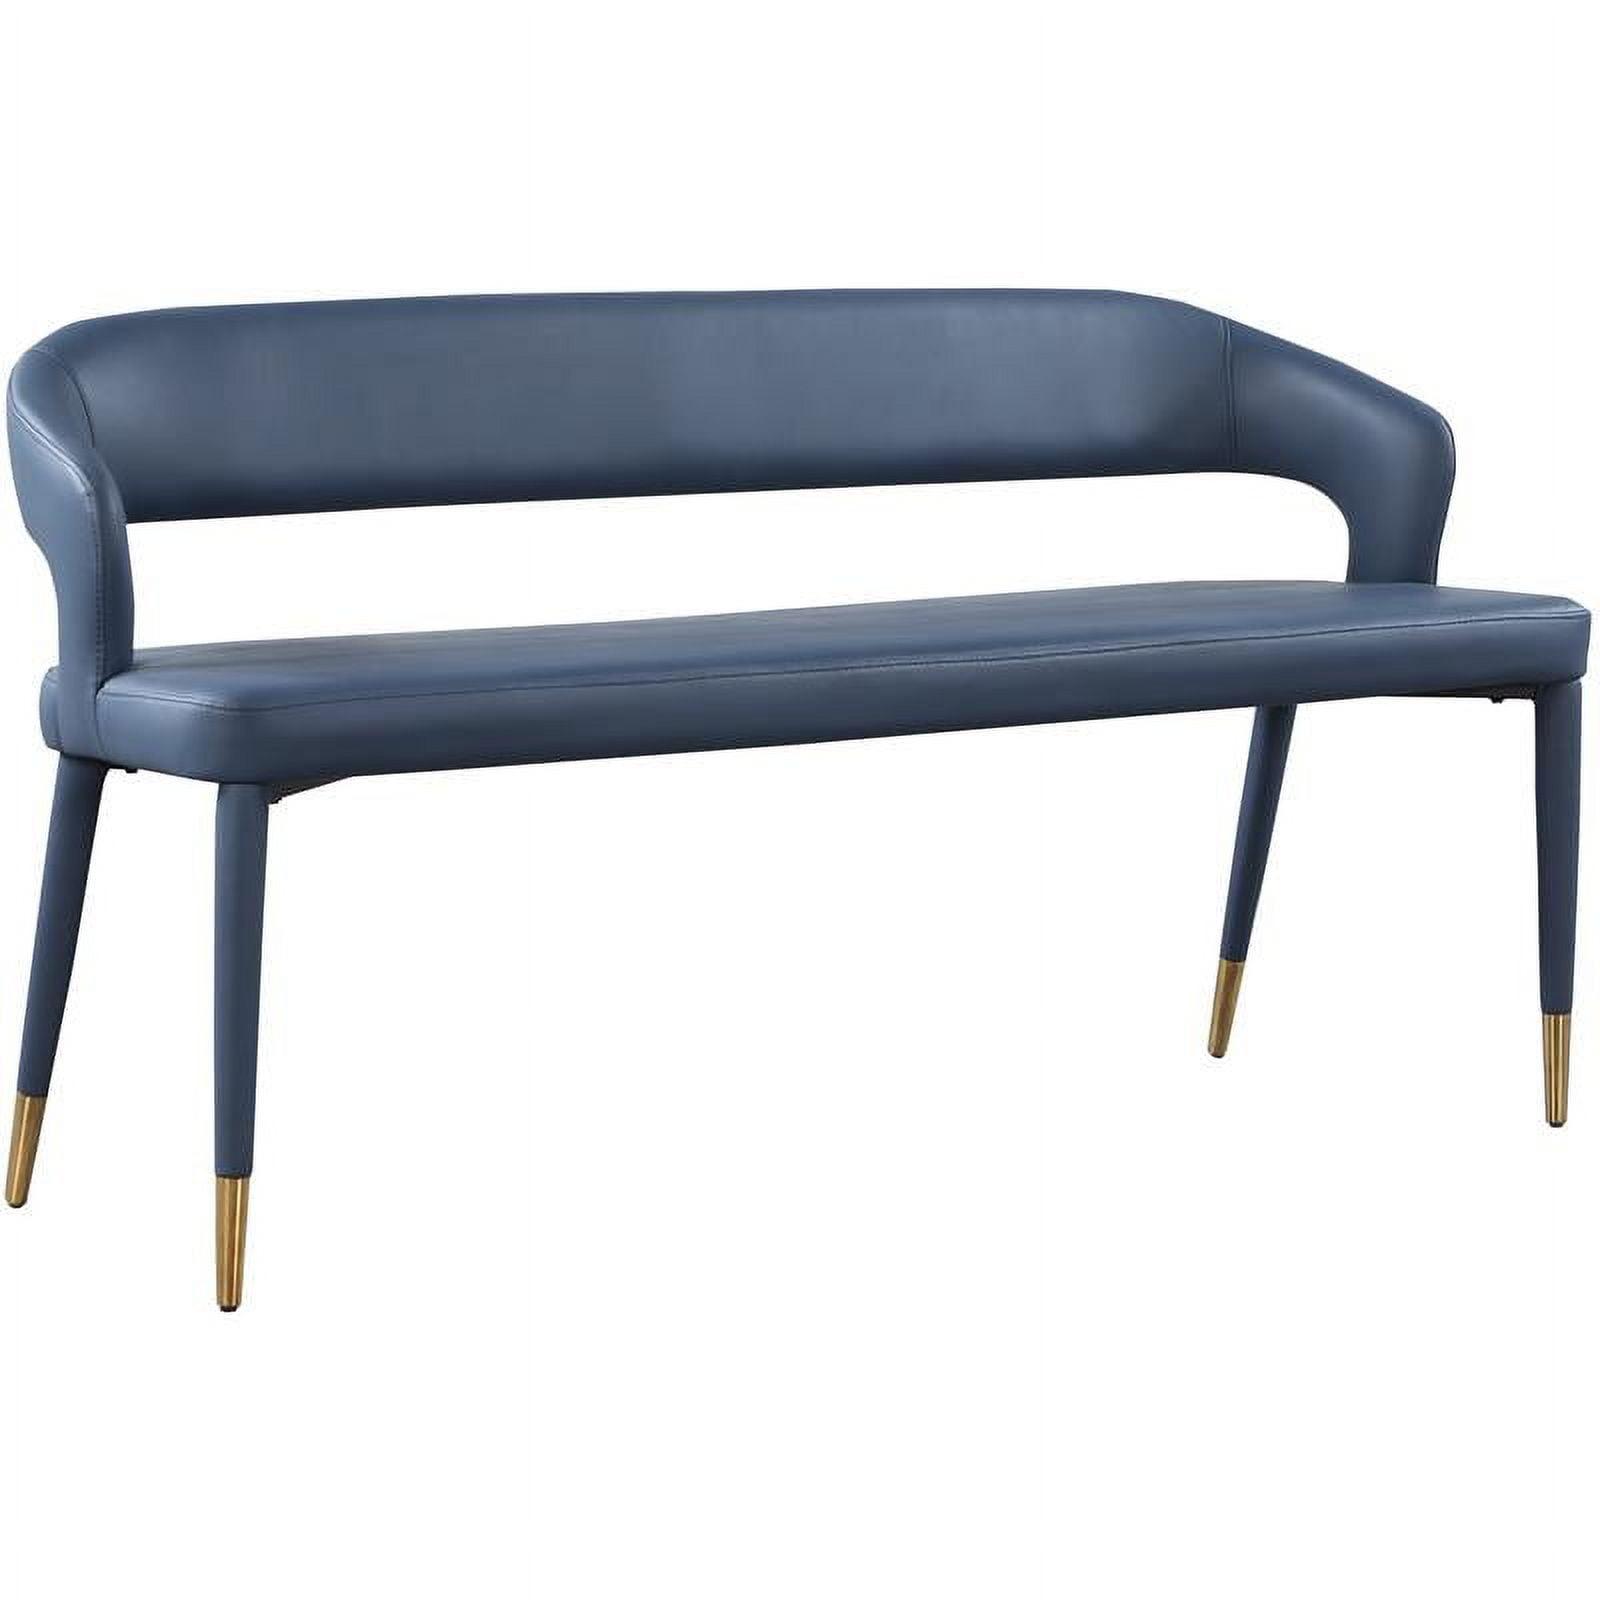 Destiny Navy Vegan Leather Bench with Gold-Tipped Legs